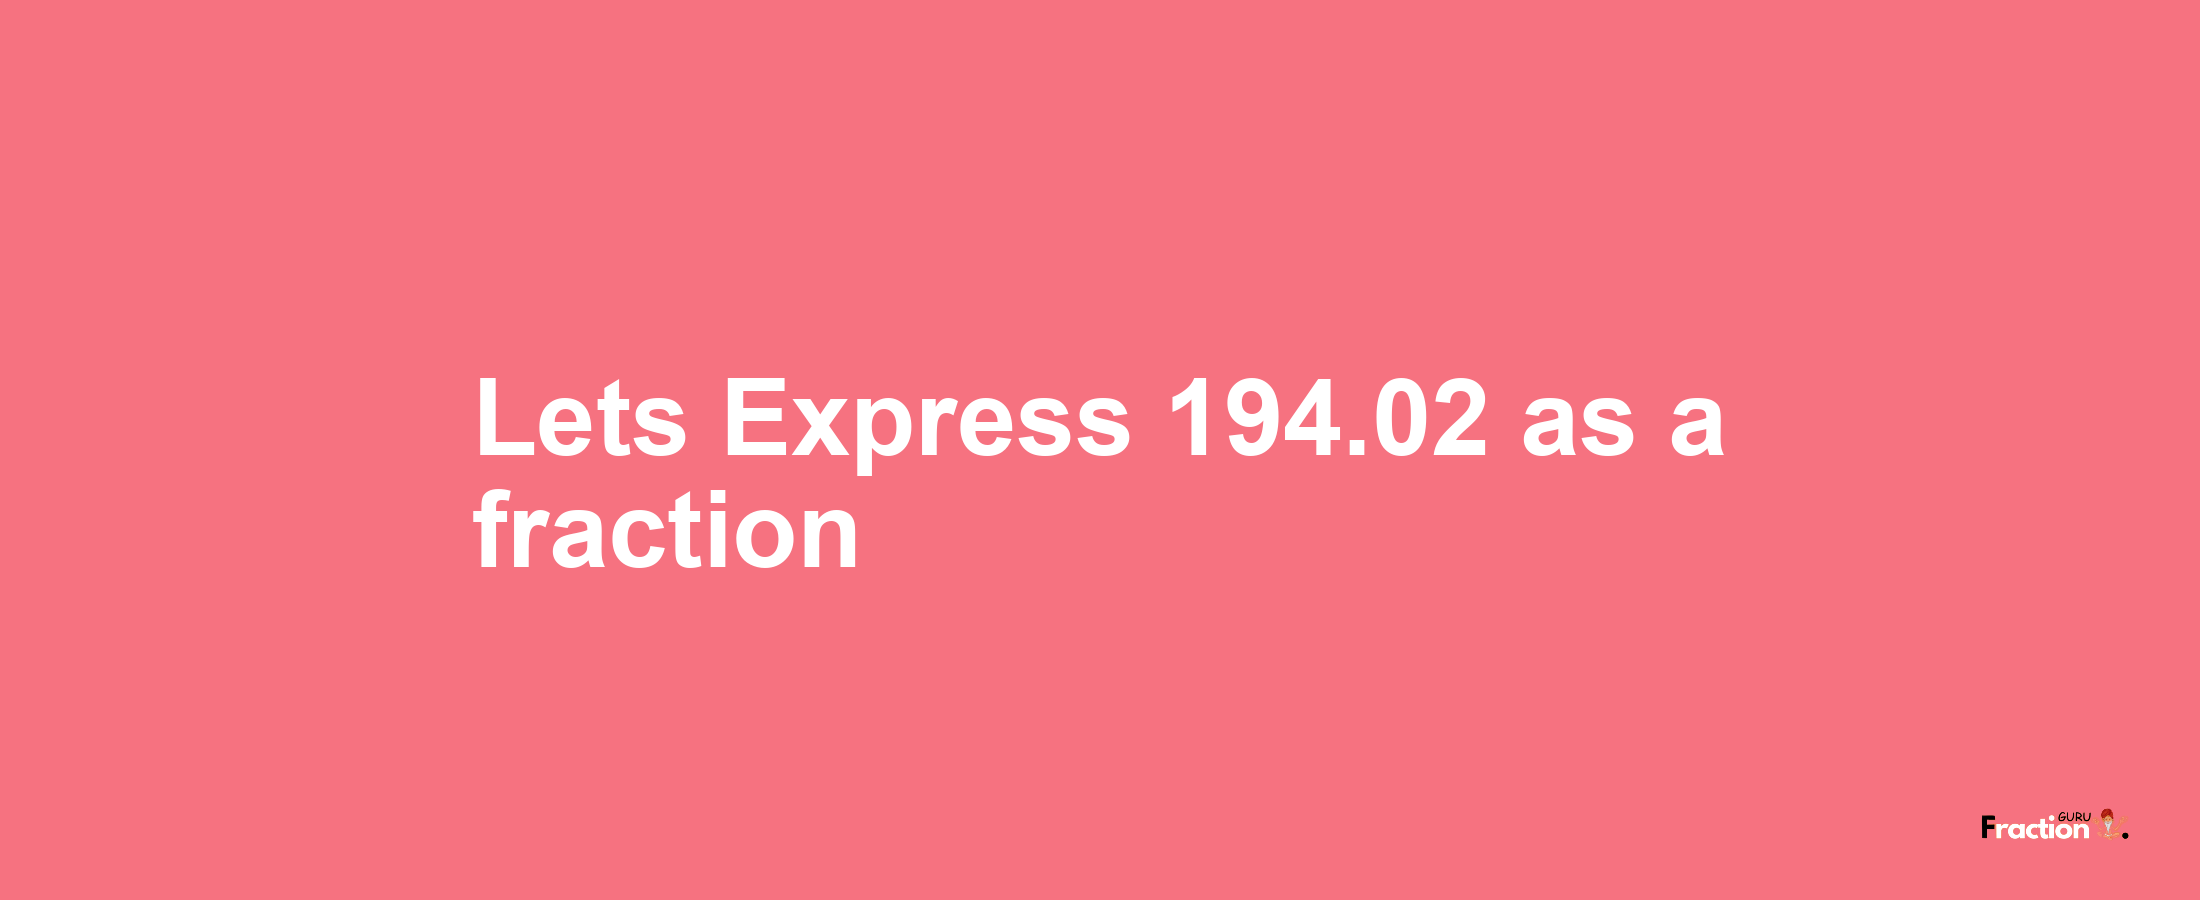 Lets Express 194.02 as afraction